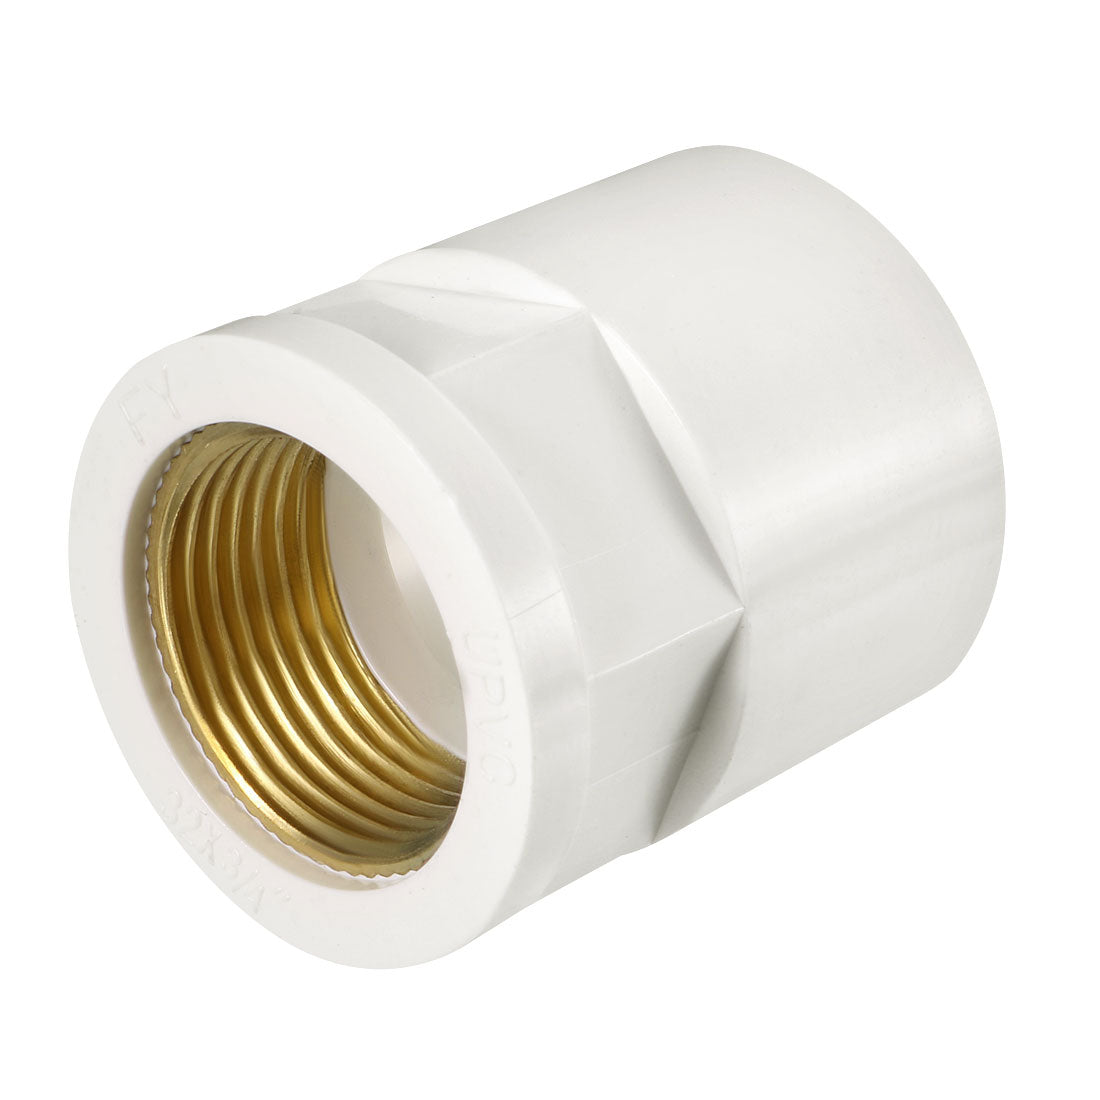 uxcell Uxcell 32mm Slip x 3/4 NPT Female Brass Thread PVC Pipe Fitting Adapter 2 Pcs